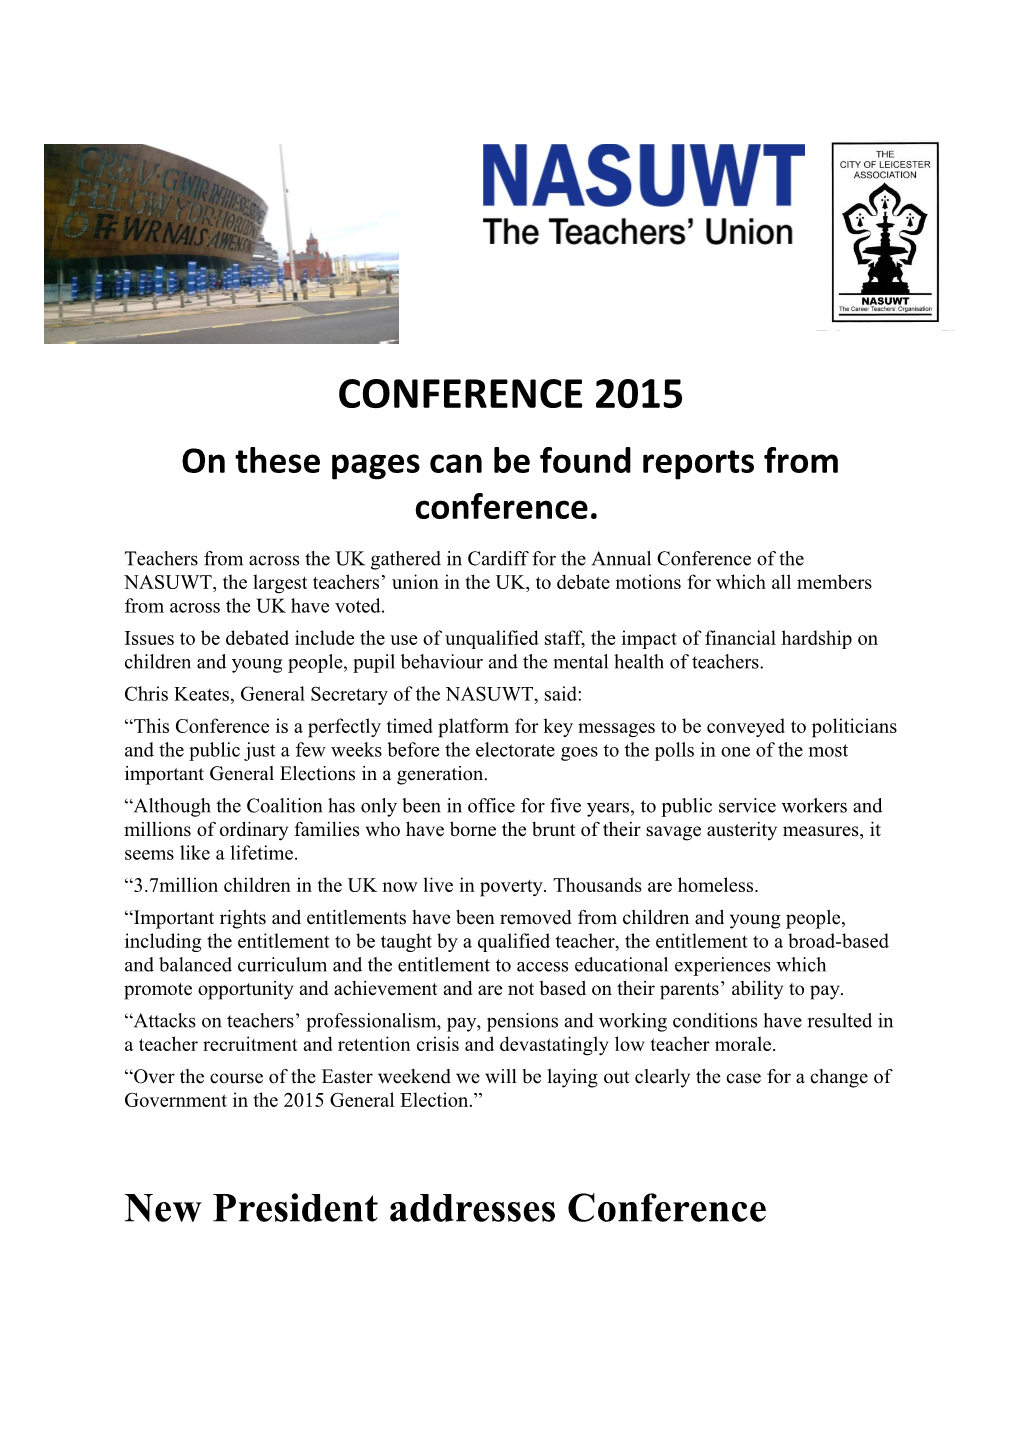 On These Pages Can Be Found Reports from Conference